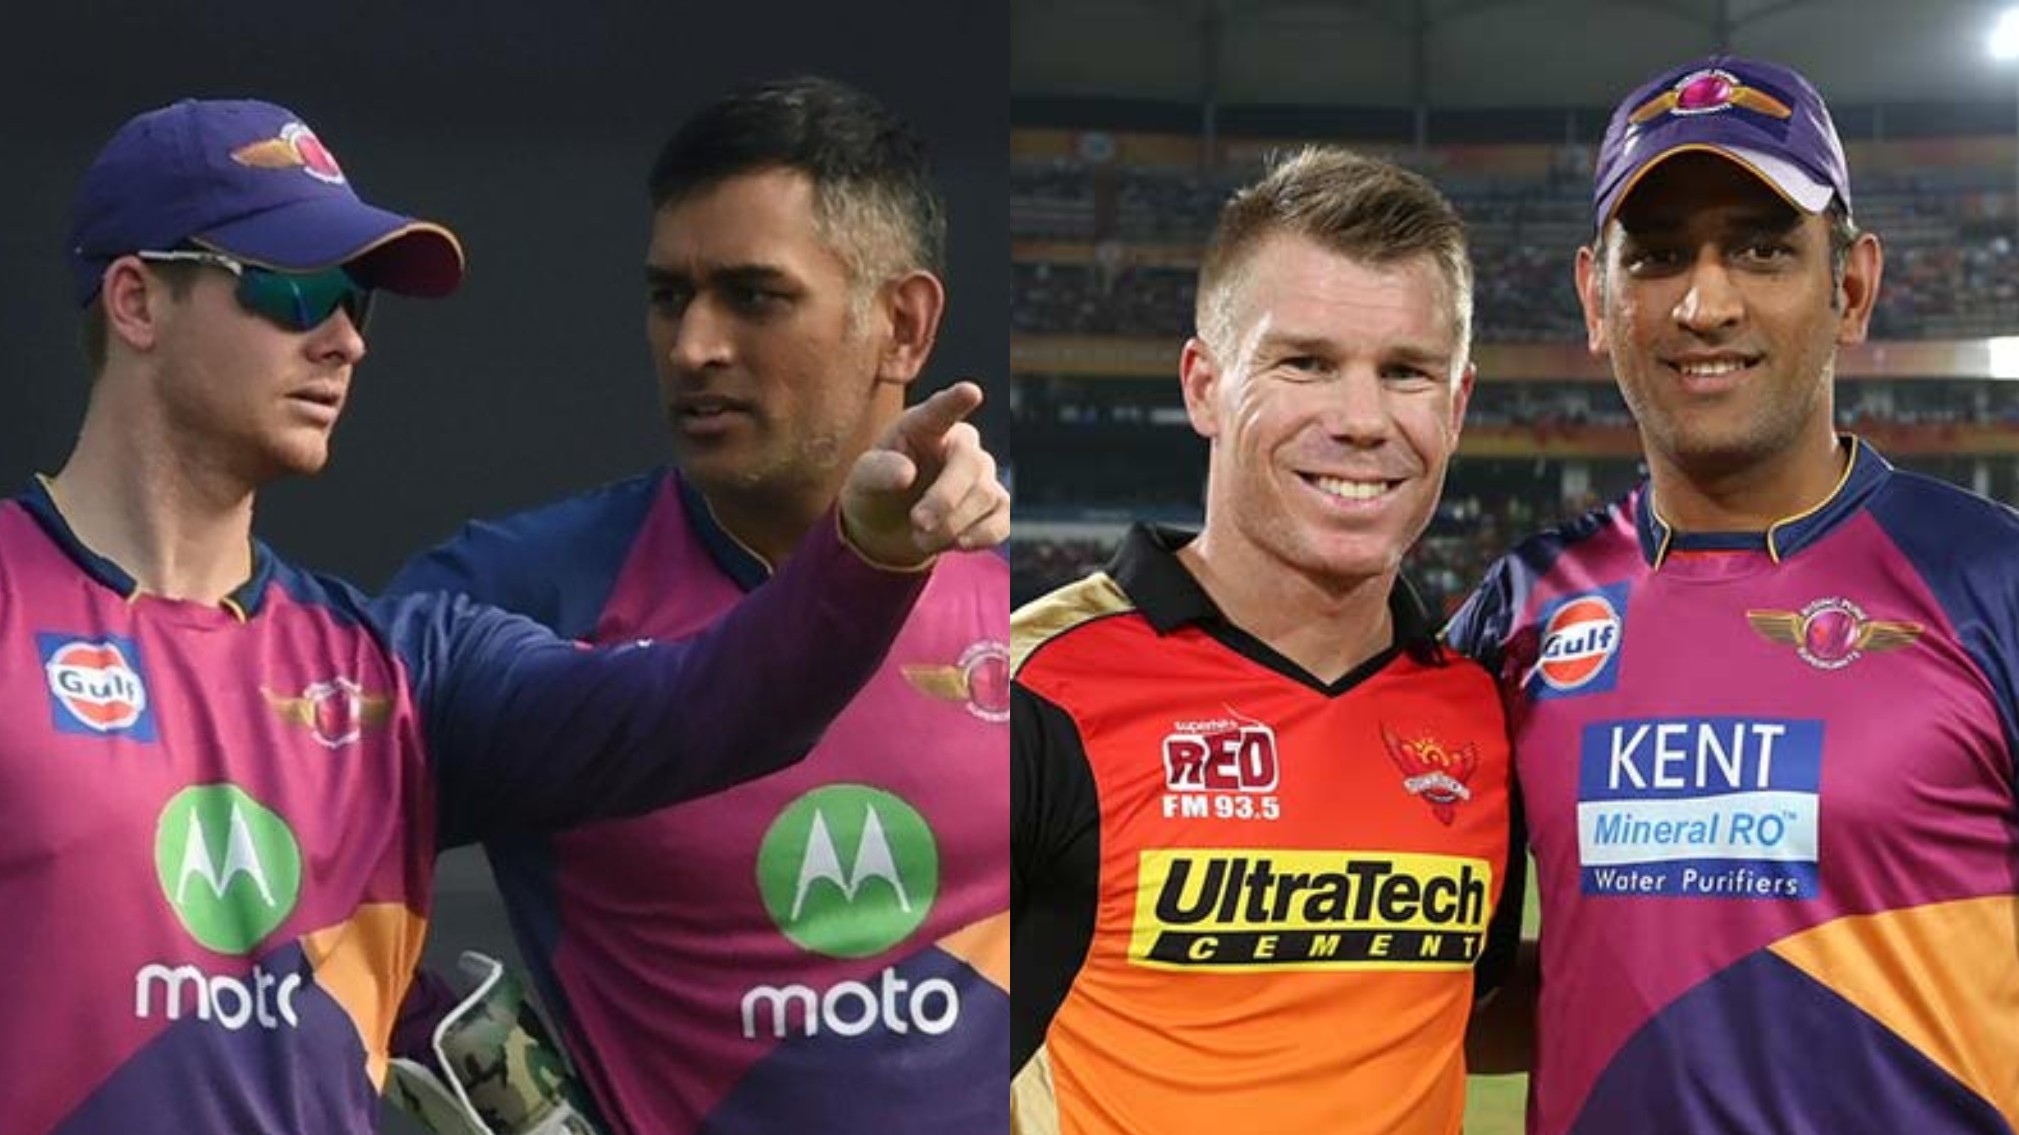 “Incredibly tough opponent” Steve Smith lauds MS Dhoni; David Warner calls him ‘one of coolest guys’